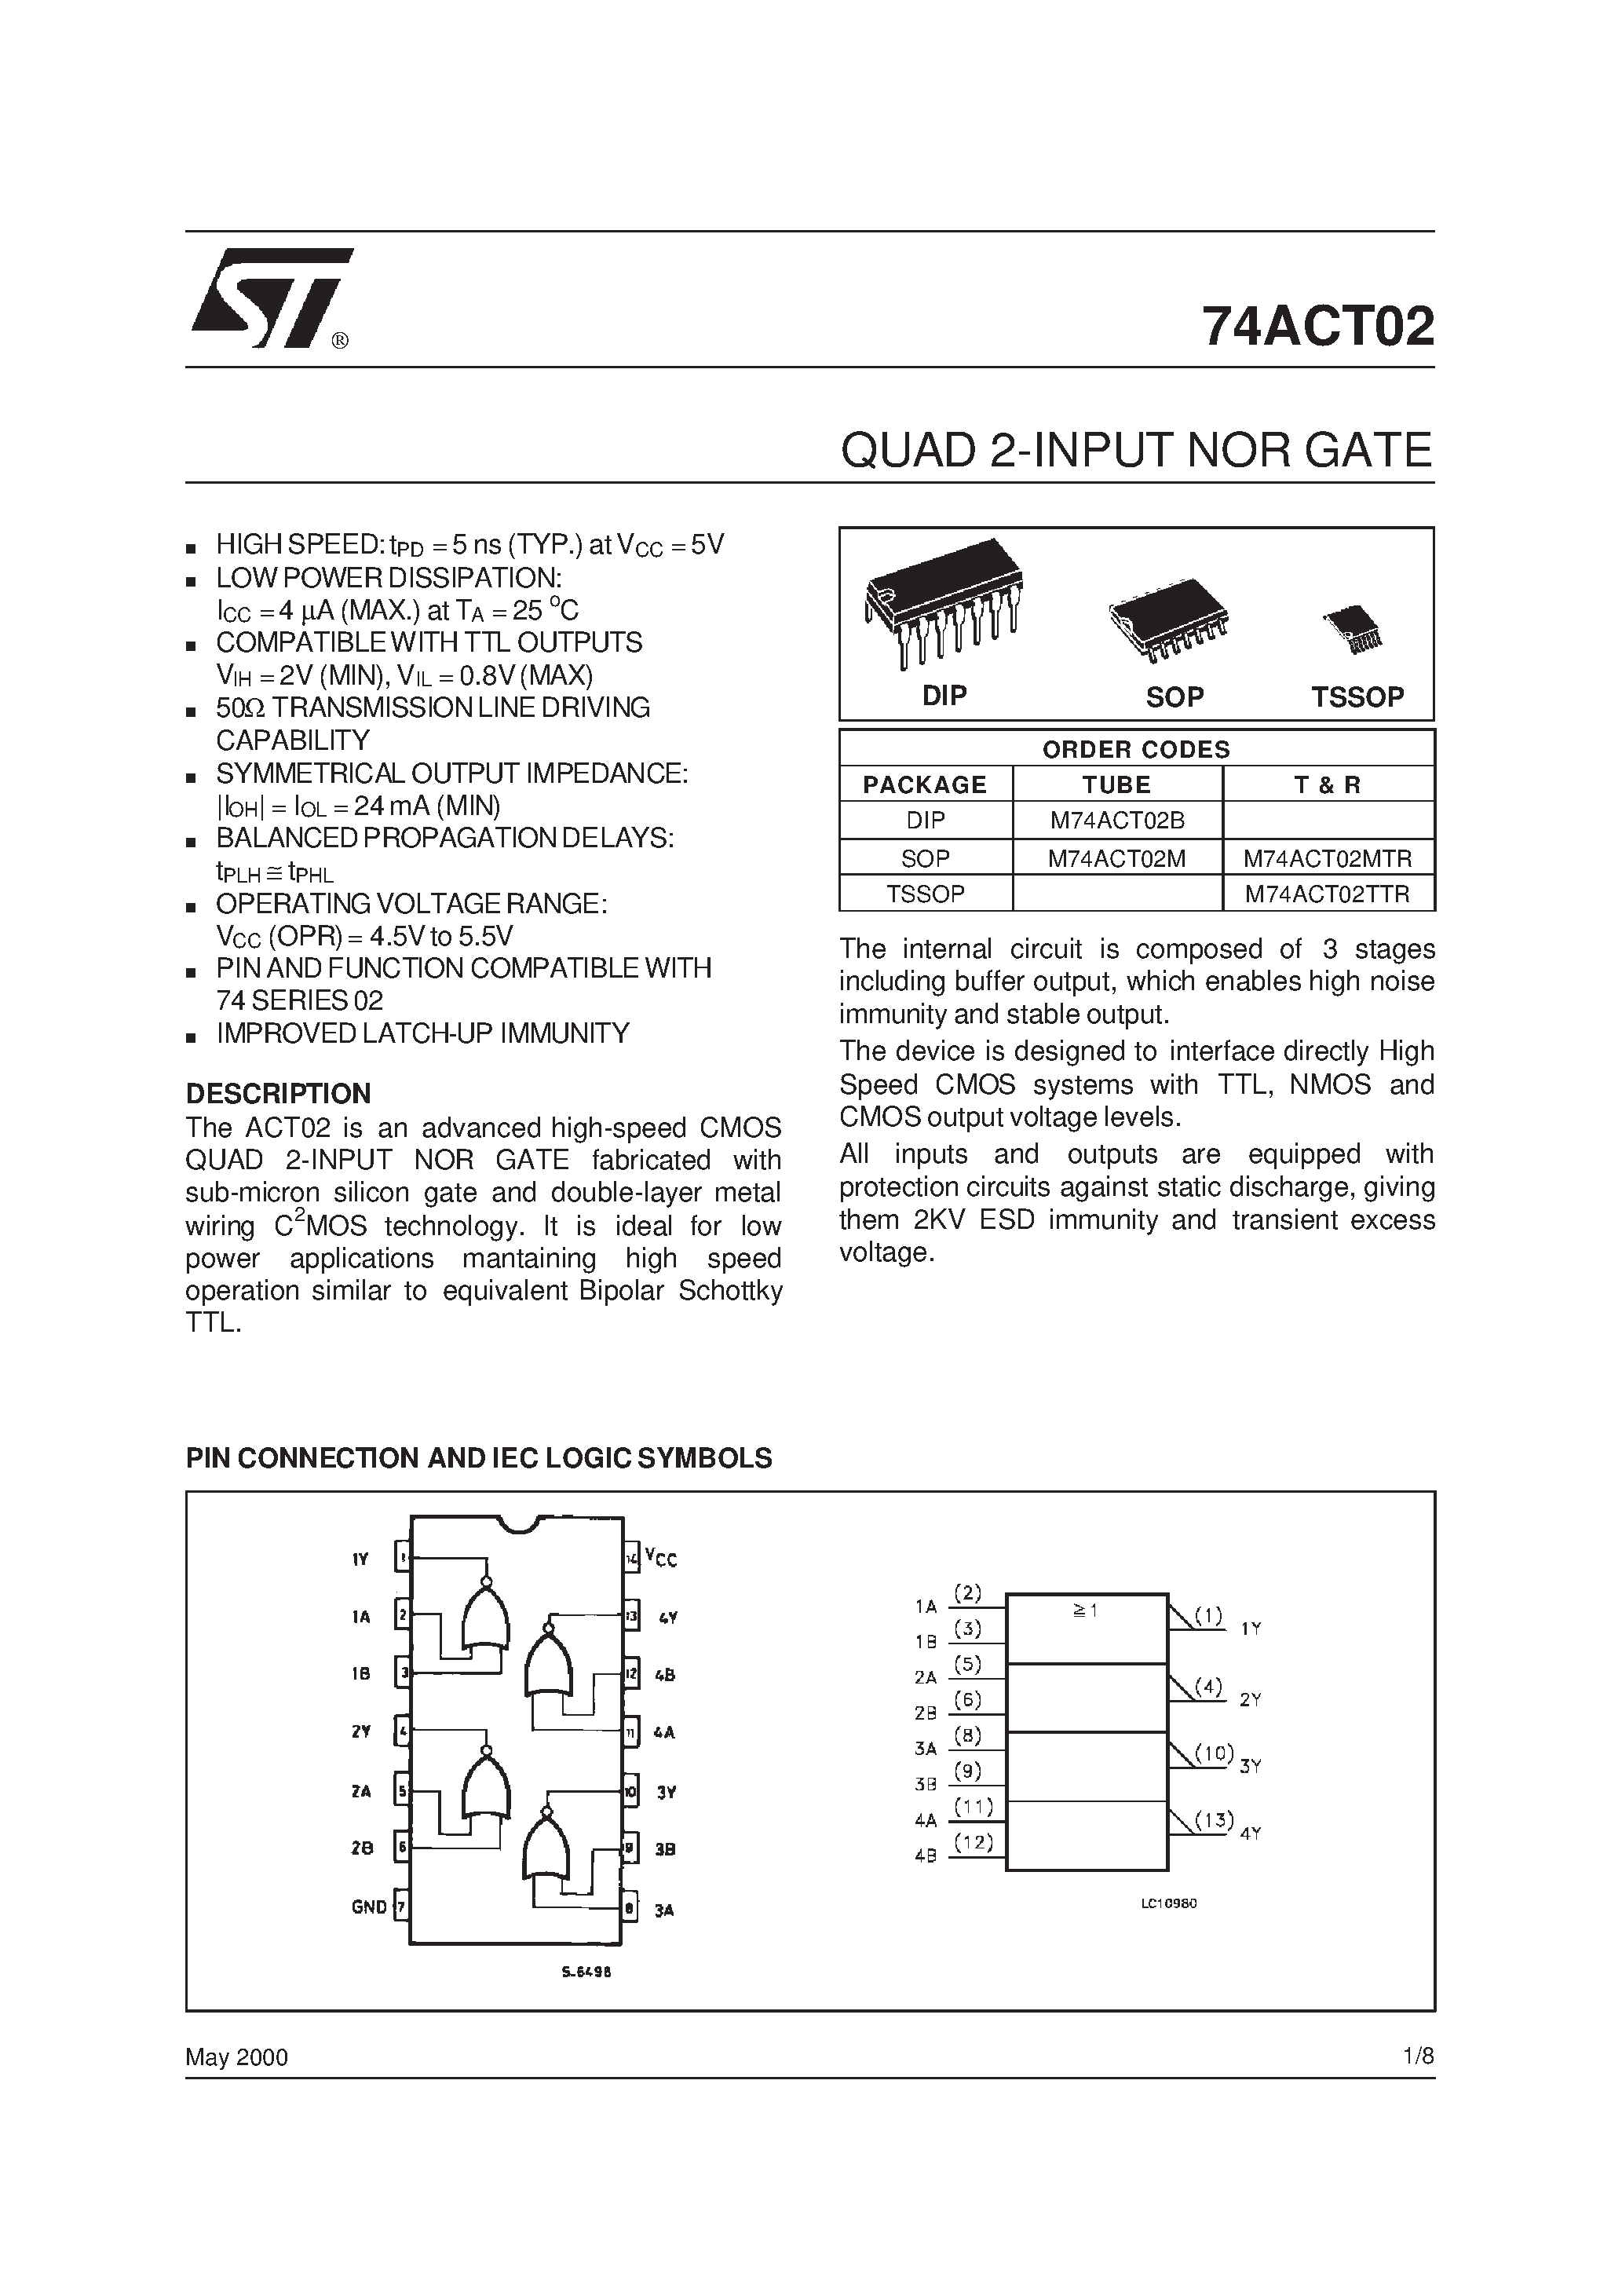 Datasheet M74ACT02MTR - QUAD 2-INPUT NOR GATE page 1